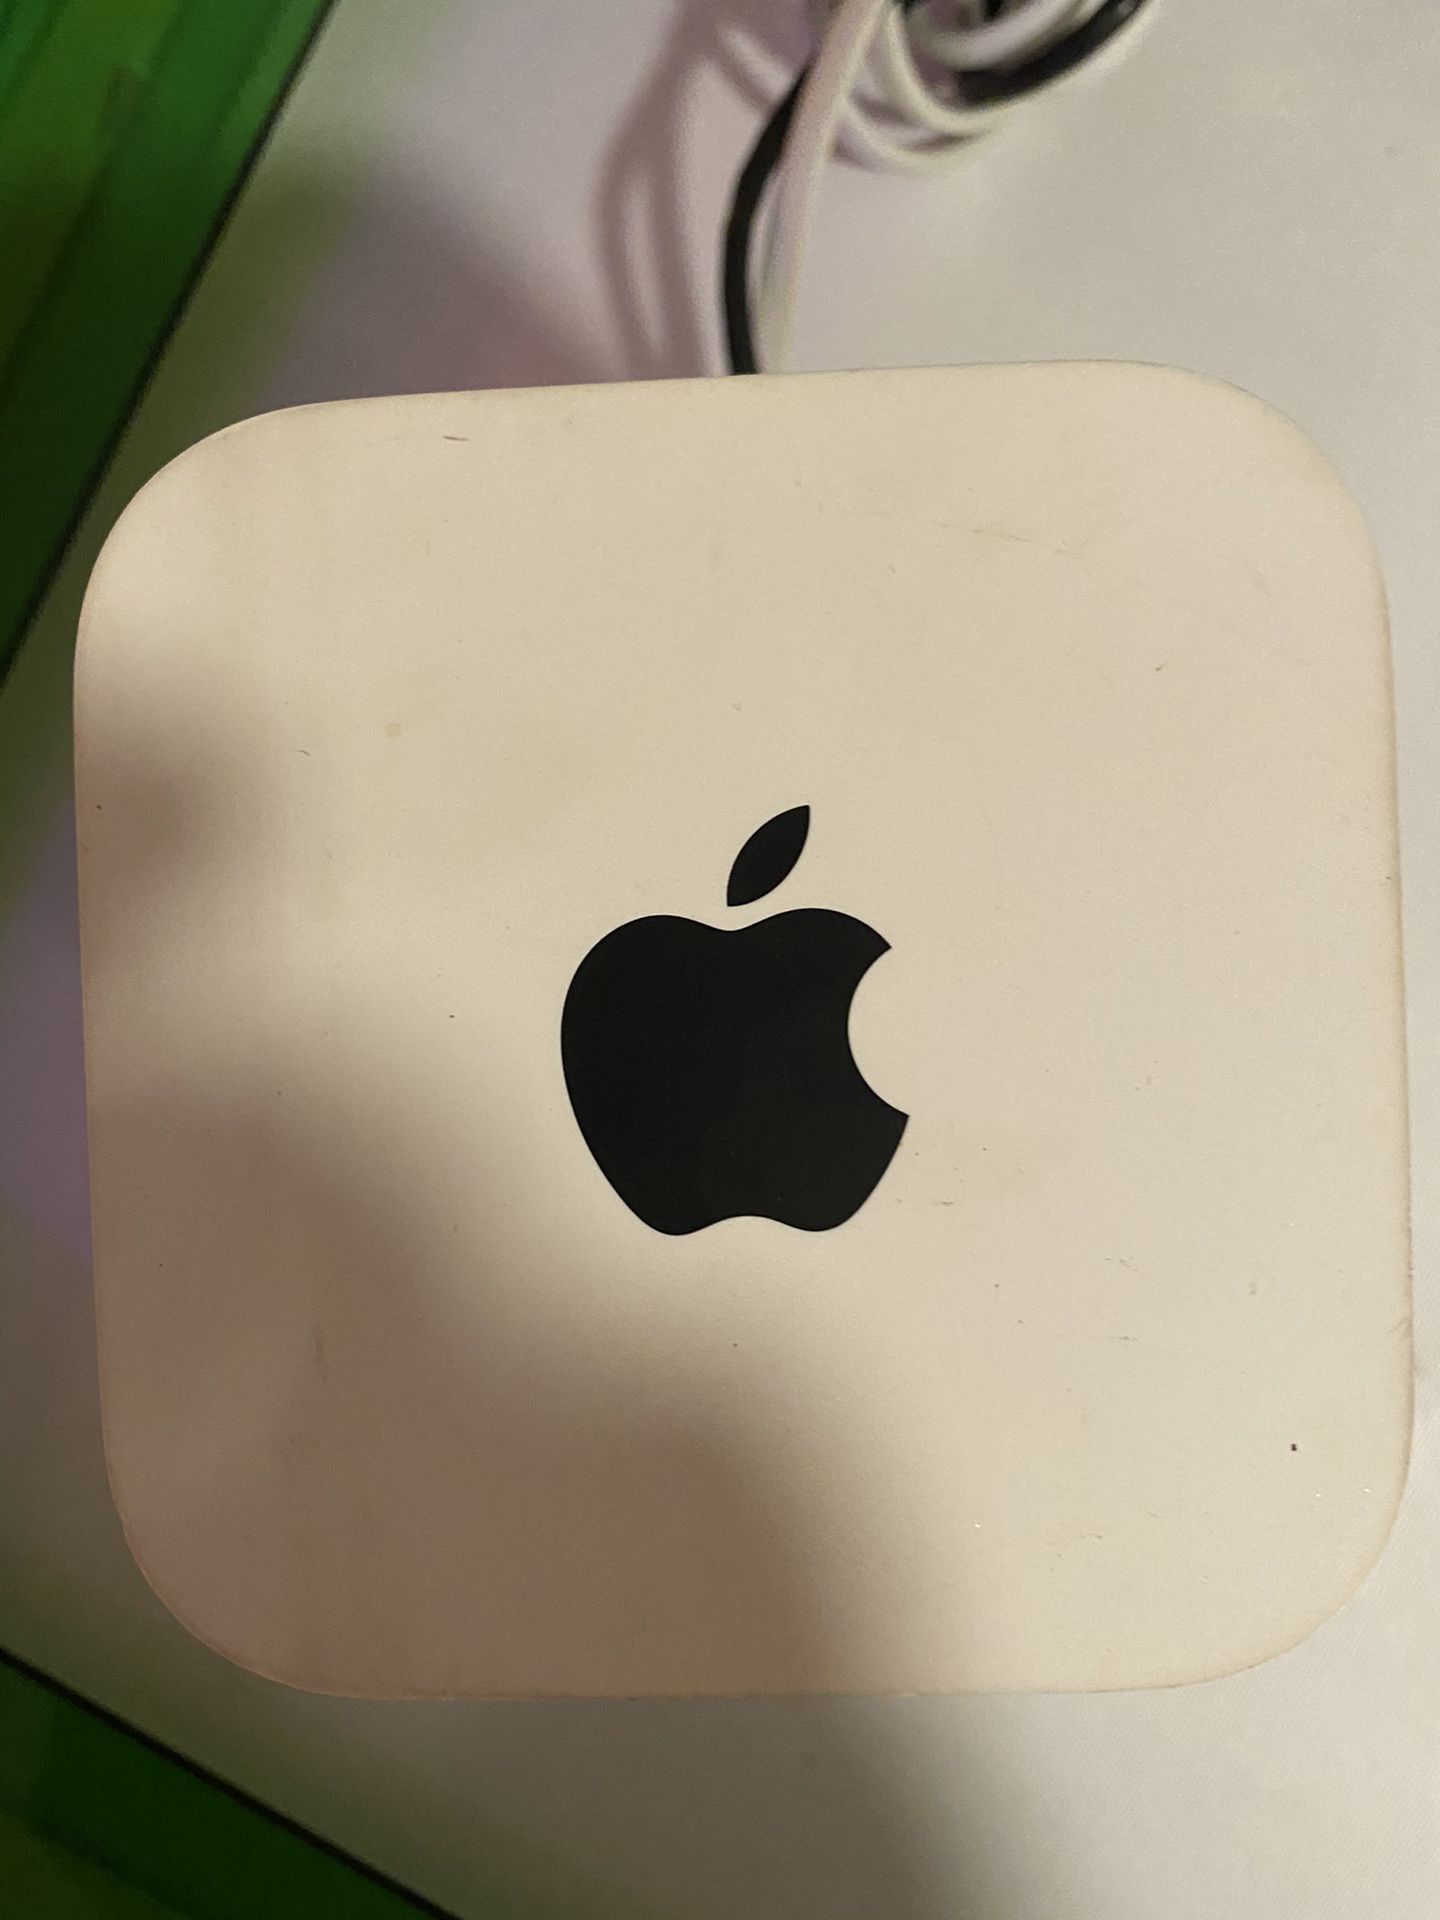 APPLE AirPort Extreme